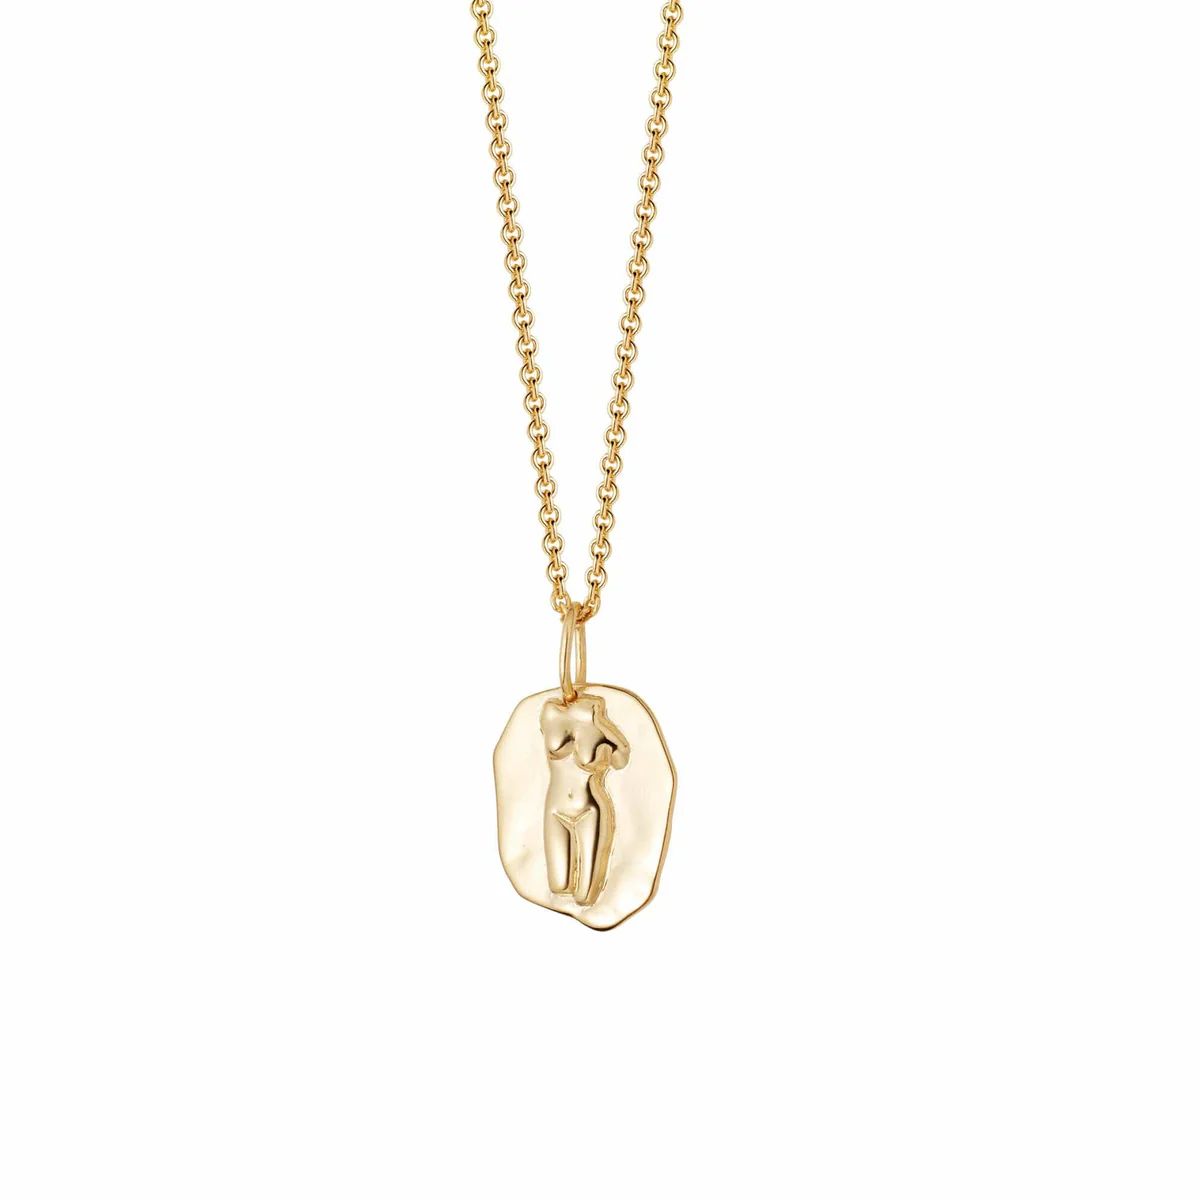 Aphrodite Necklace 18ct Gold Plate | Daisy London Jewellery